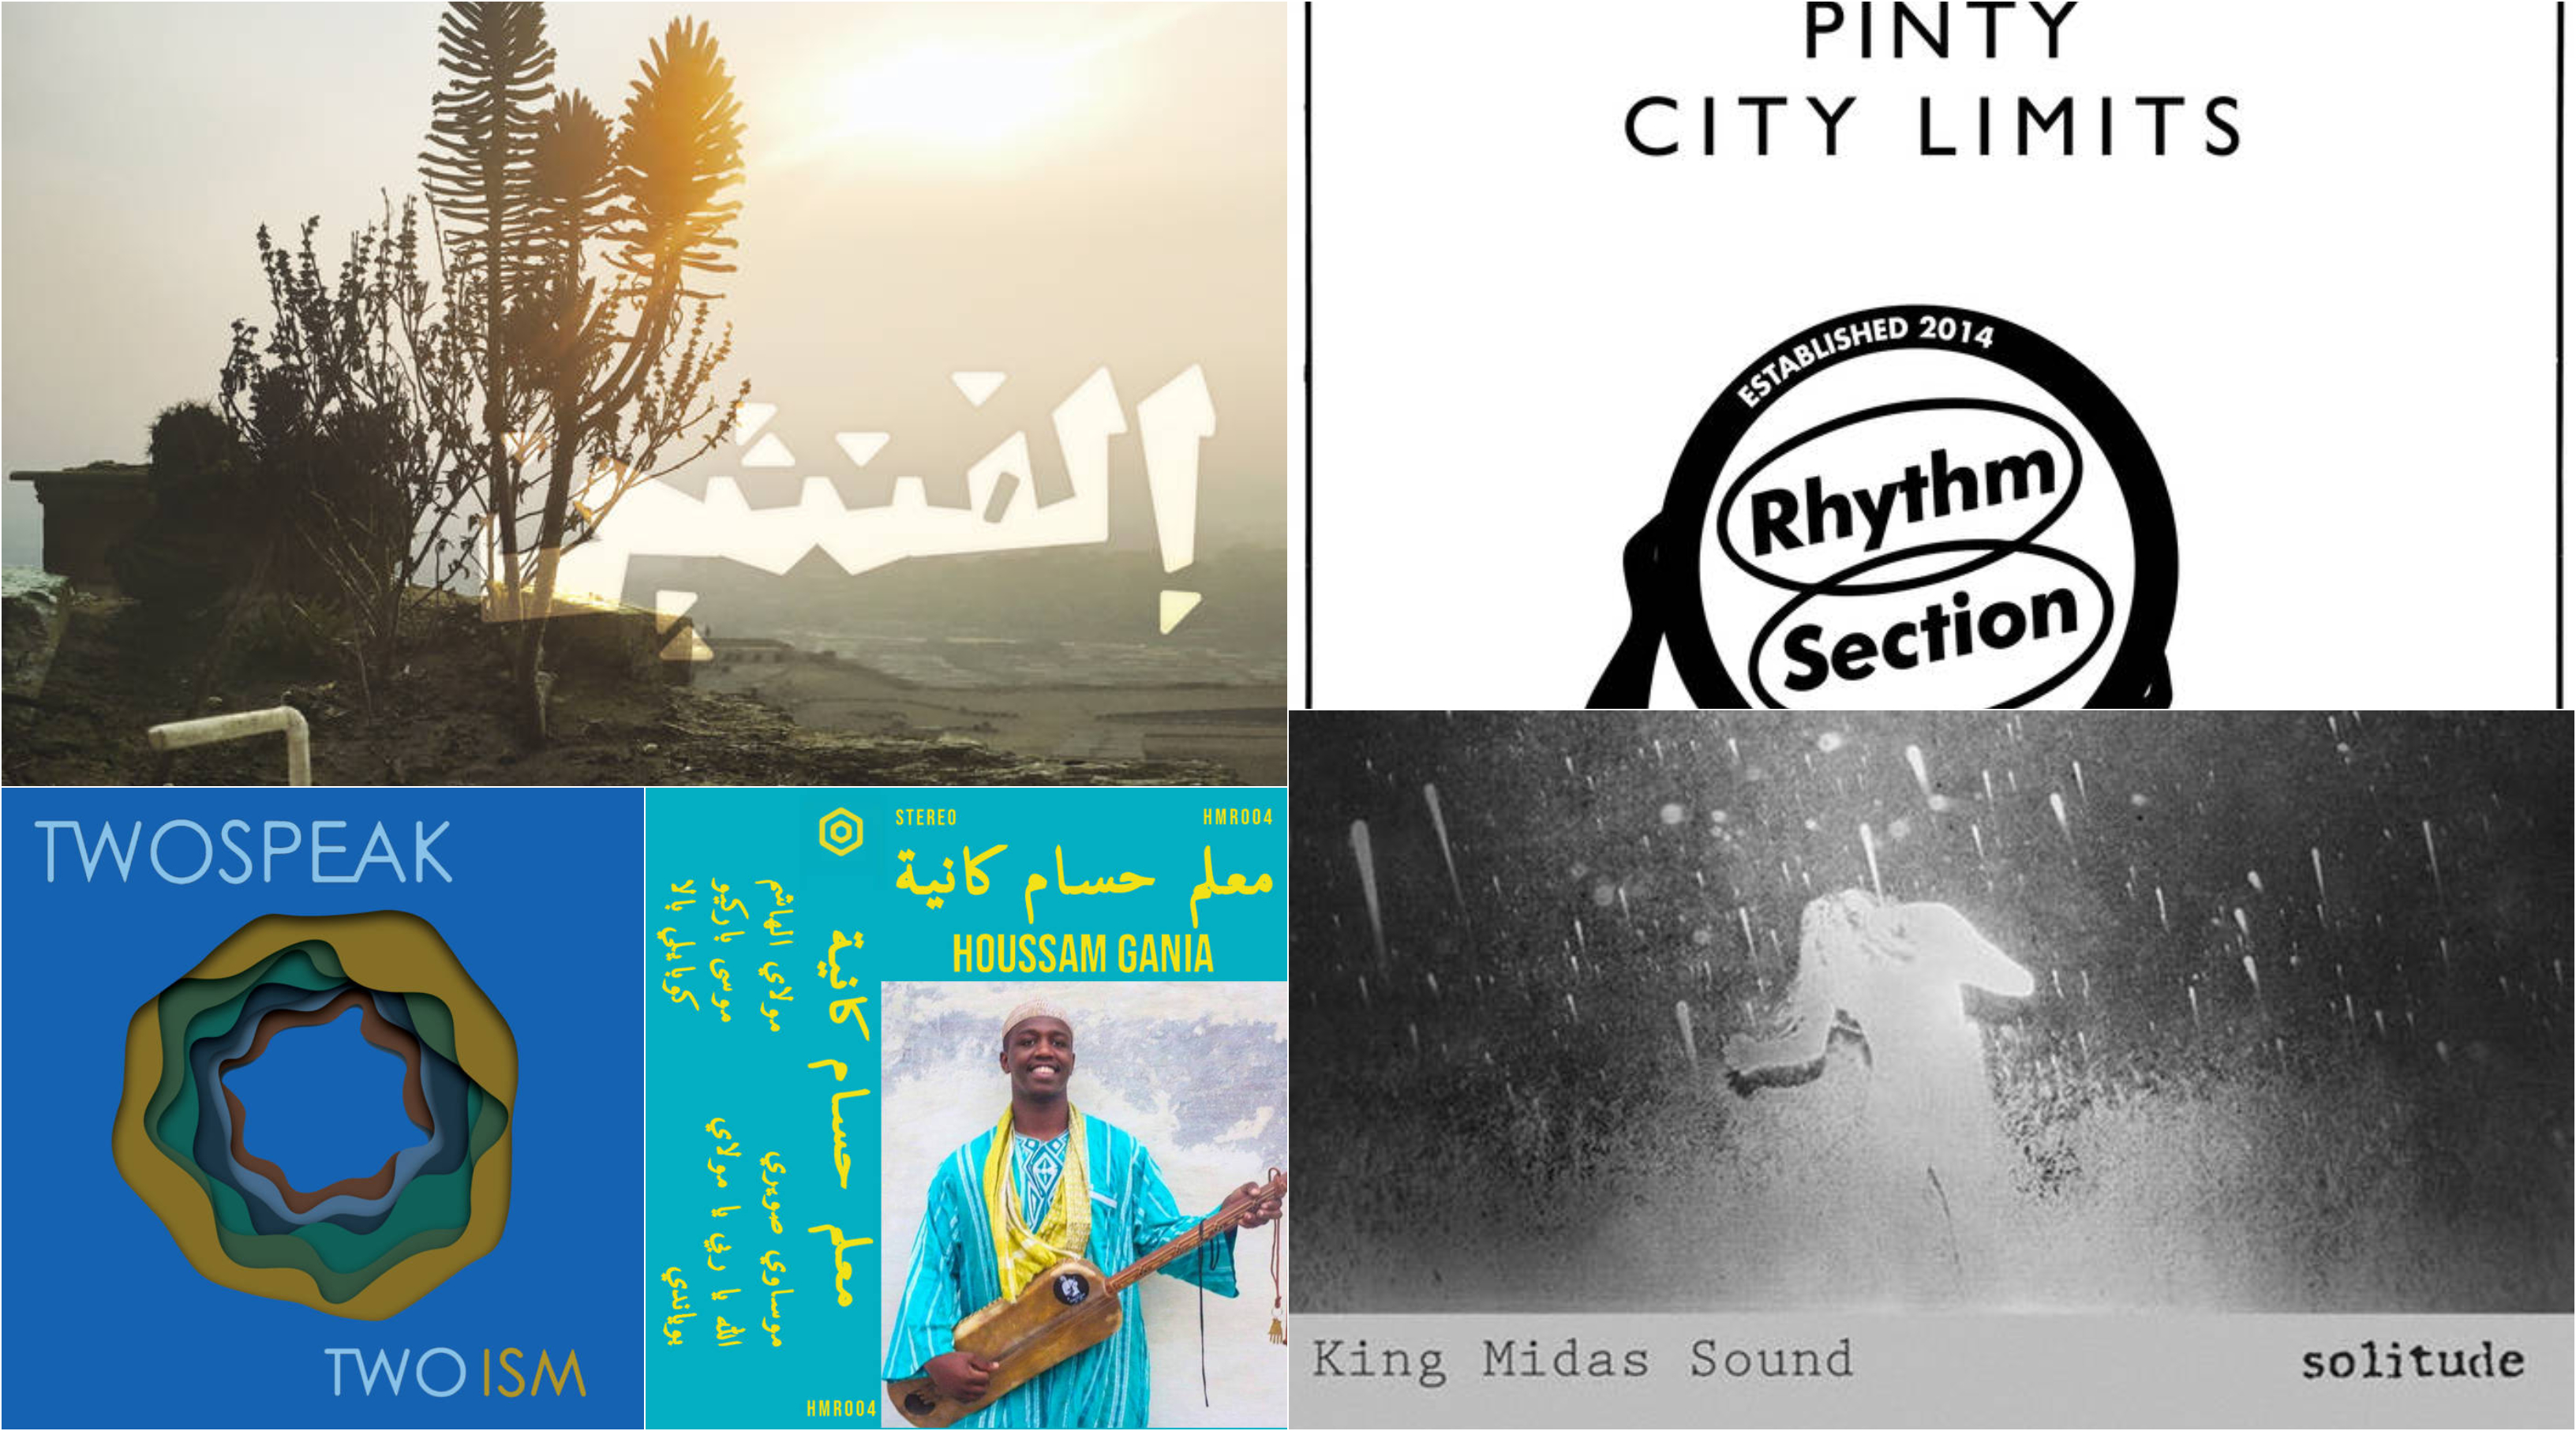 This week's list of essential new albums incudes Pinty, King Midas Sound, TwoSpeak and more.